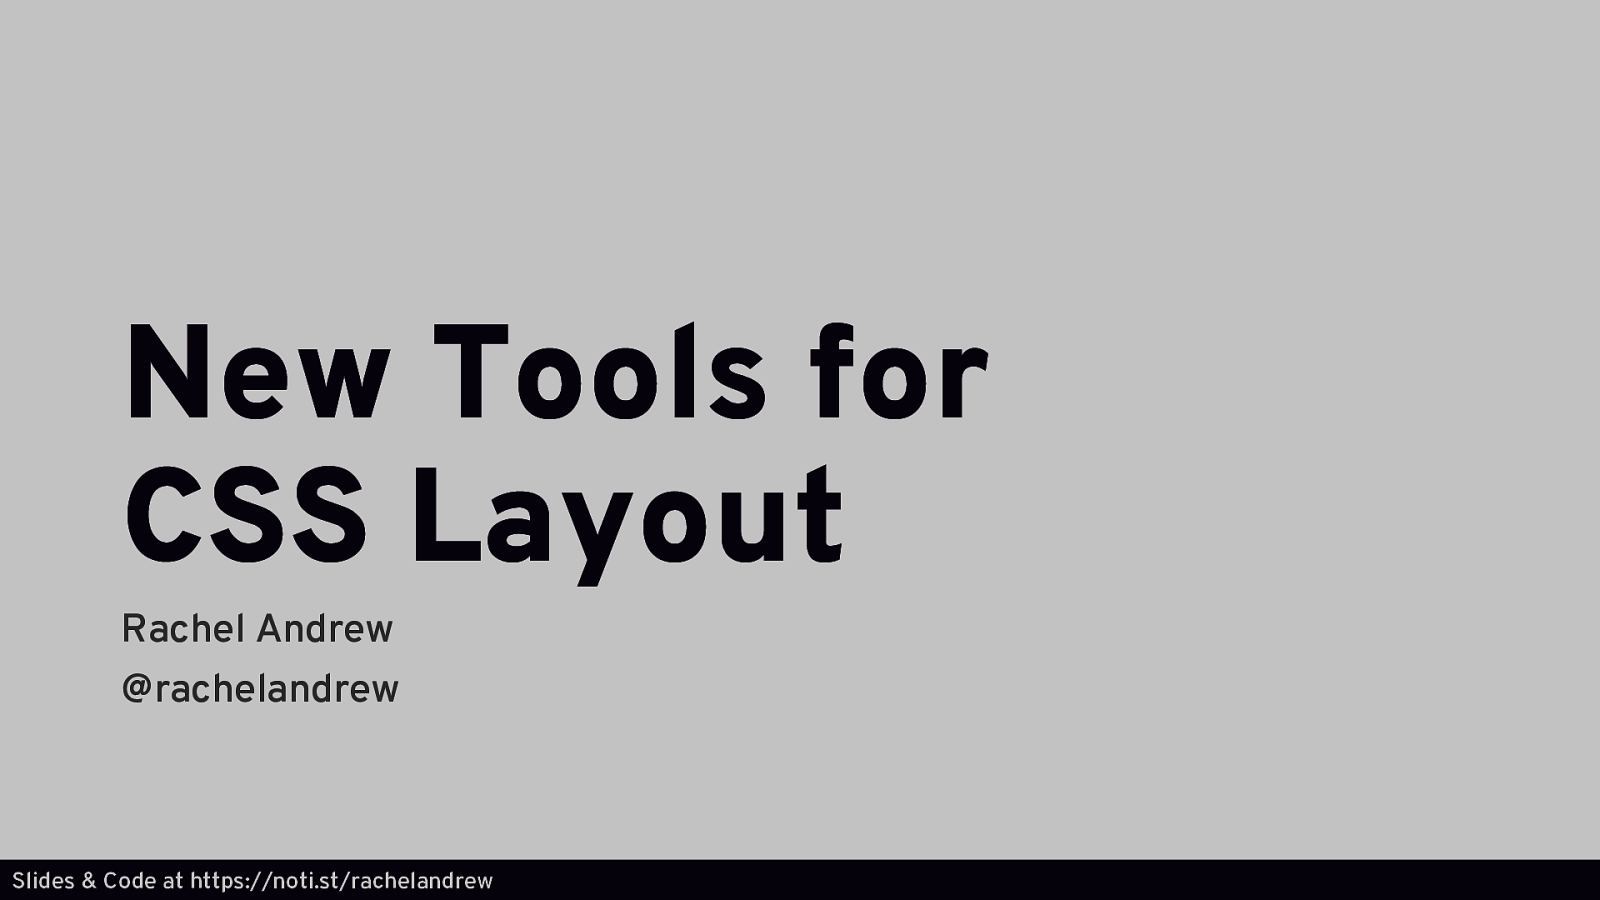 New Tools for CSS Layout